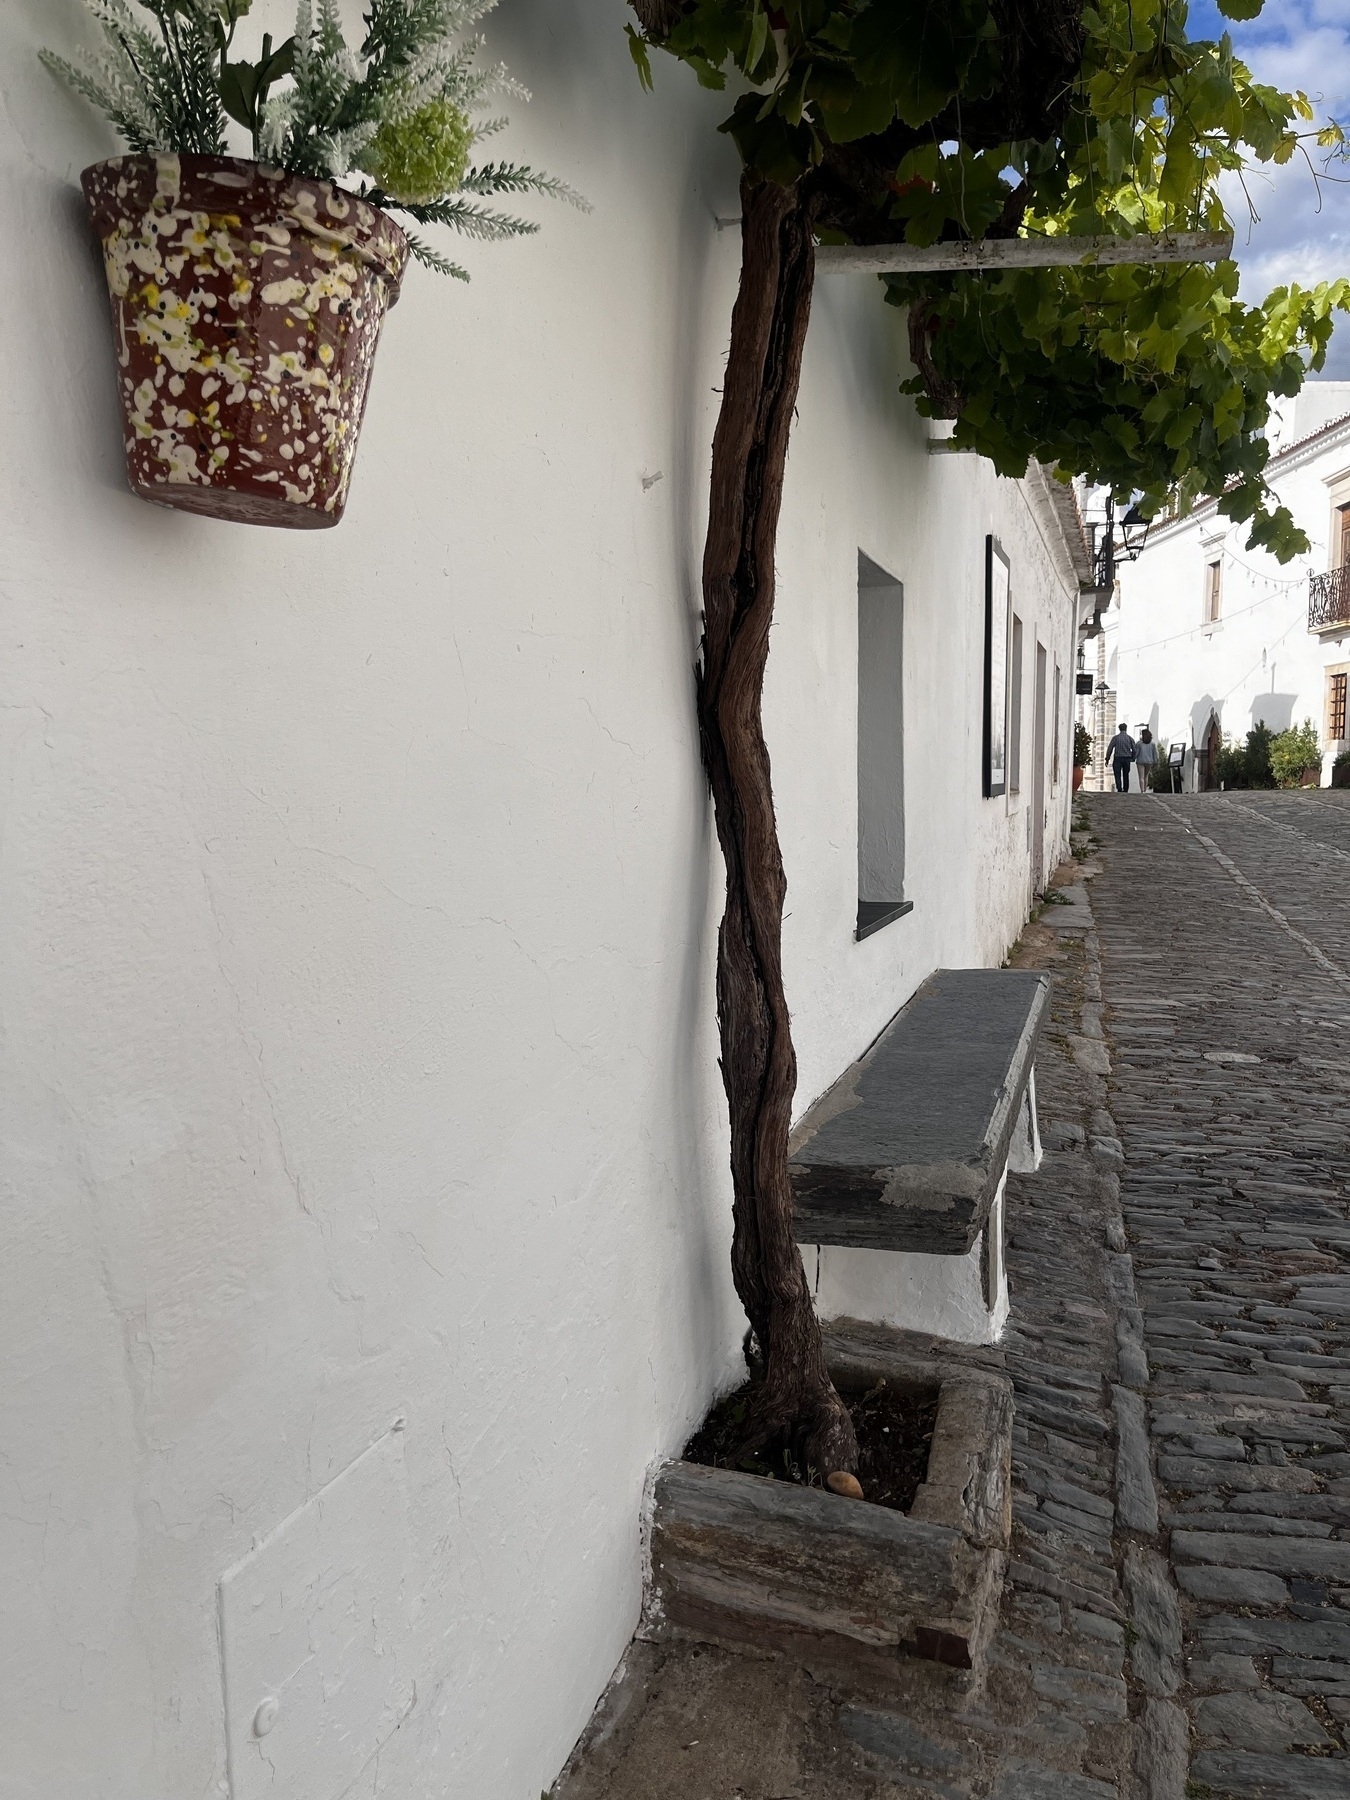 The wall of a house painted white with a small, mature grape vine growing against it, a cobbled road disappears into the distance